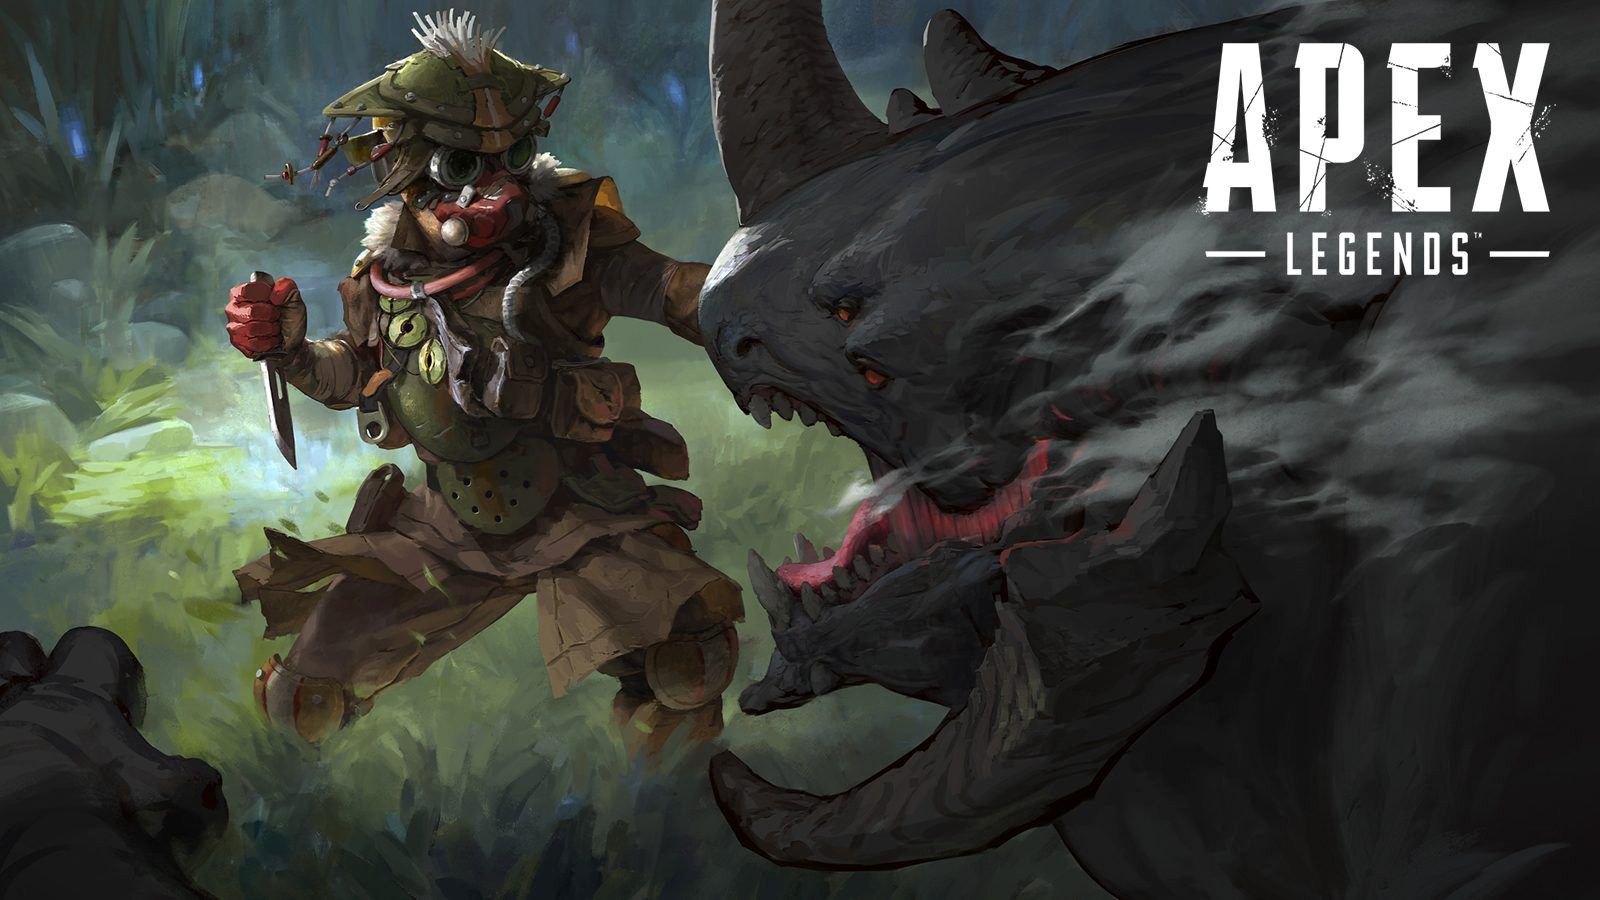 Awesome Apex Legends Game Wallpaper Bloodhound. Apex, Electronic art, Legend games